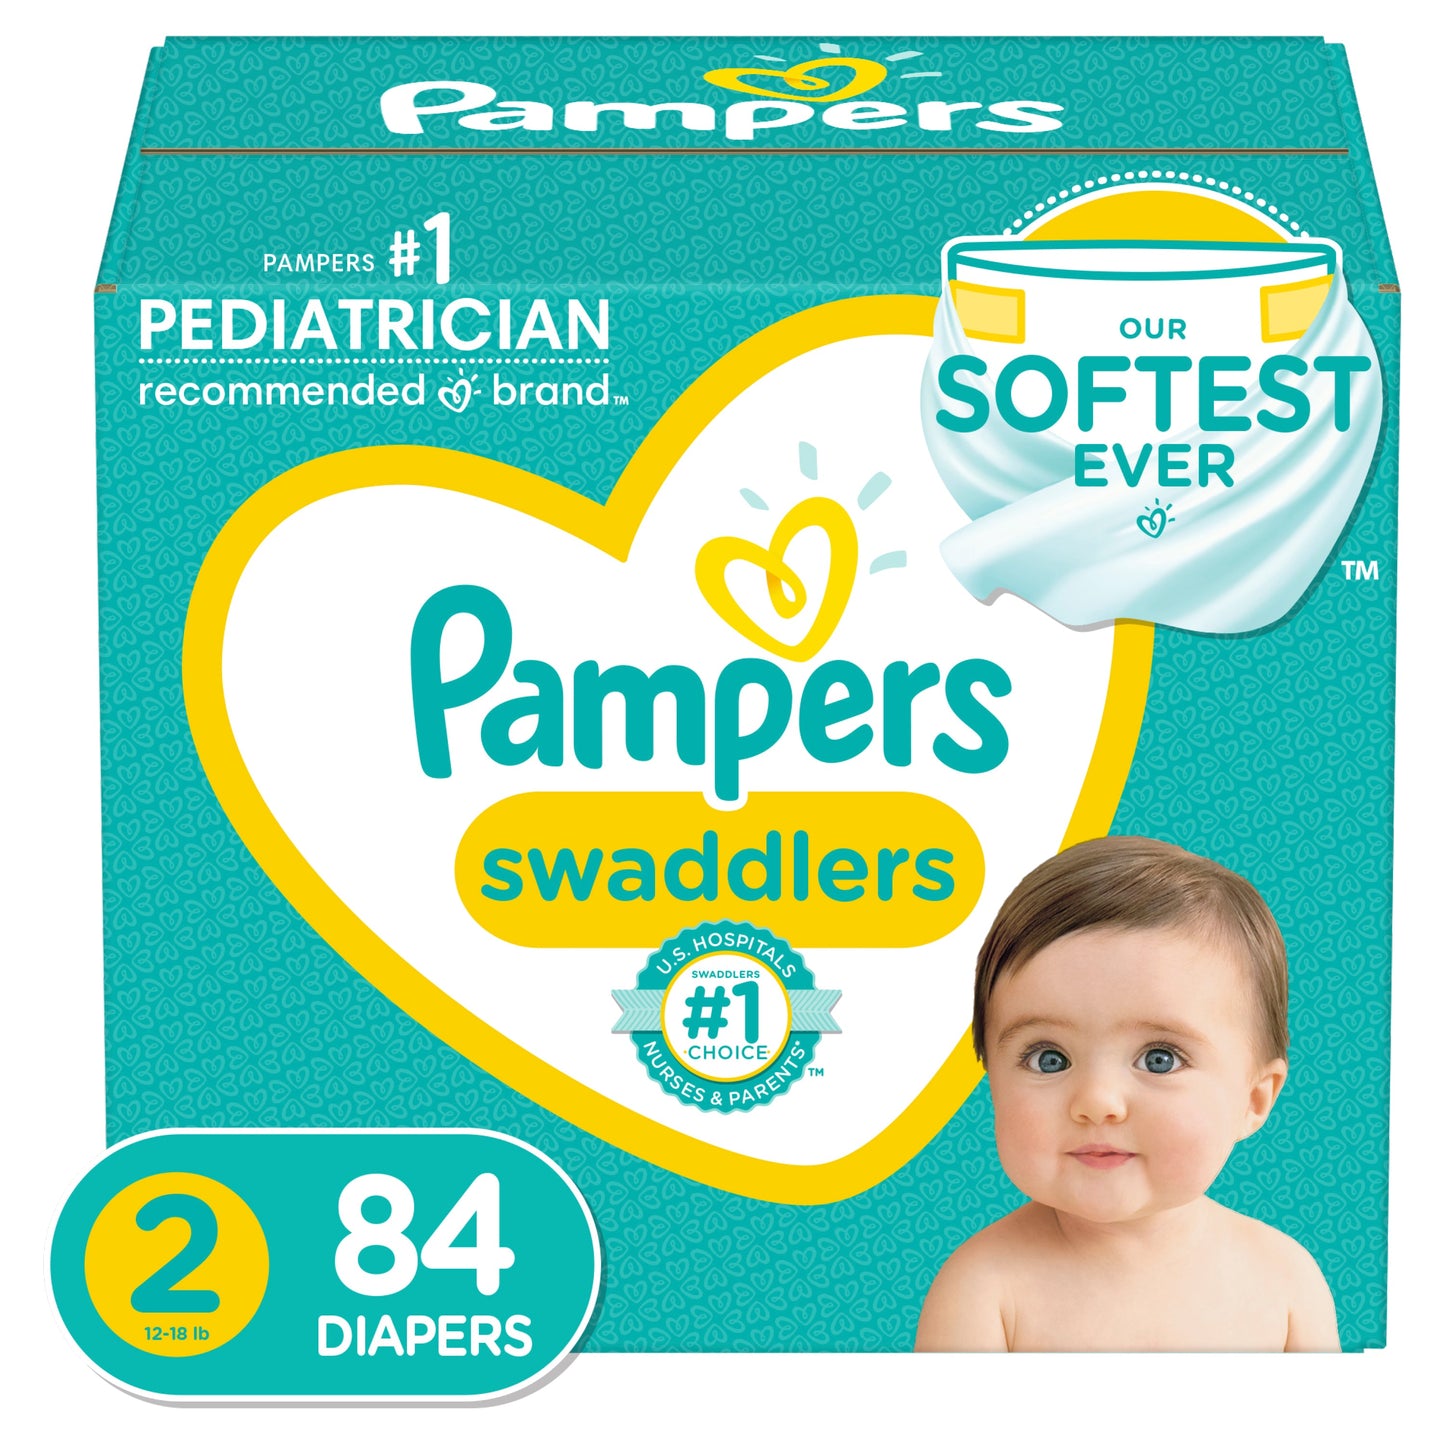 Pampers Swaddlers Diapers, Size 2 Super Pack, 84 ct